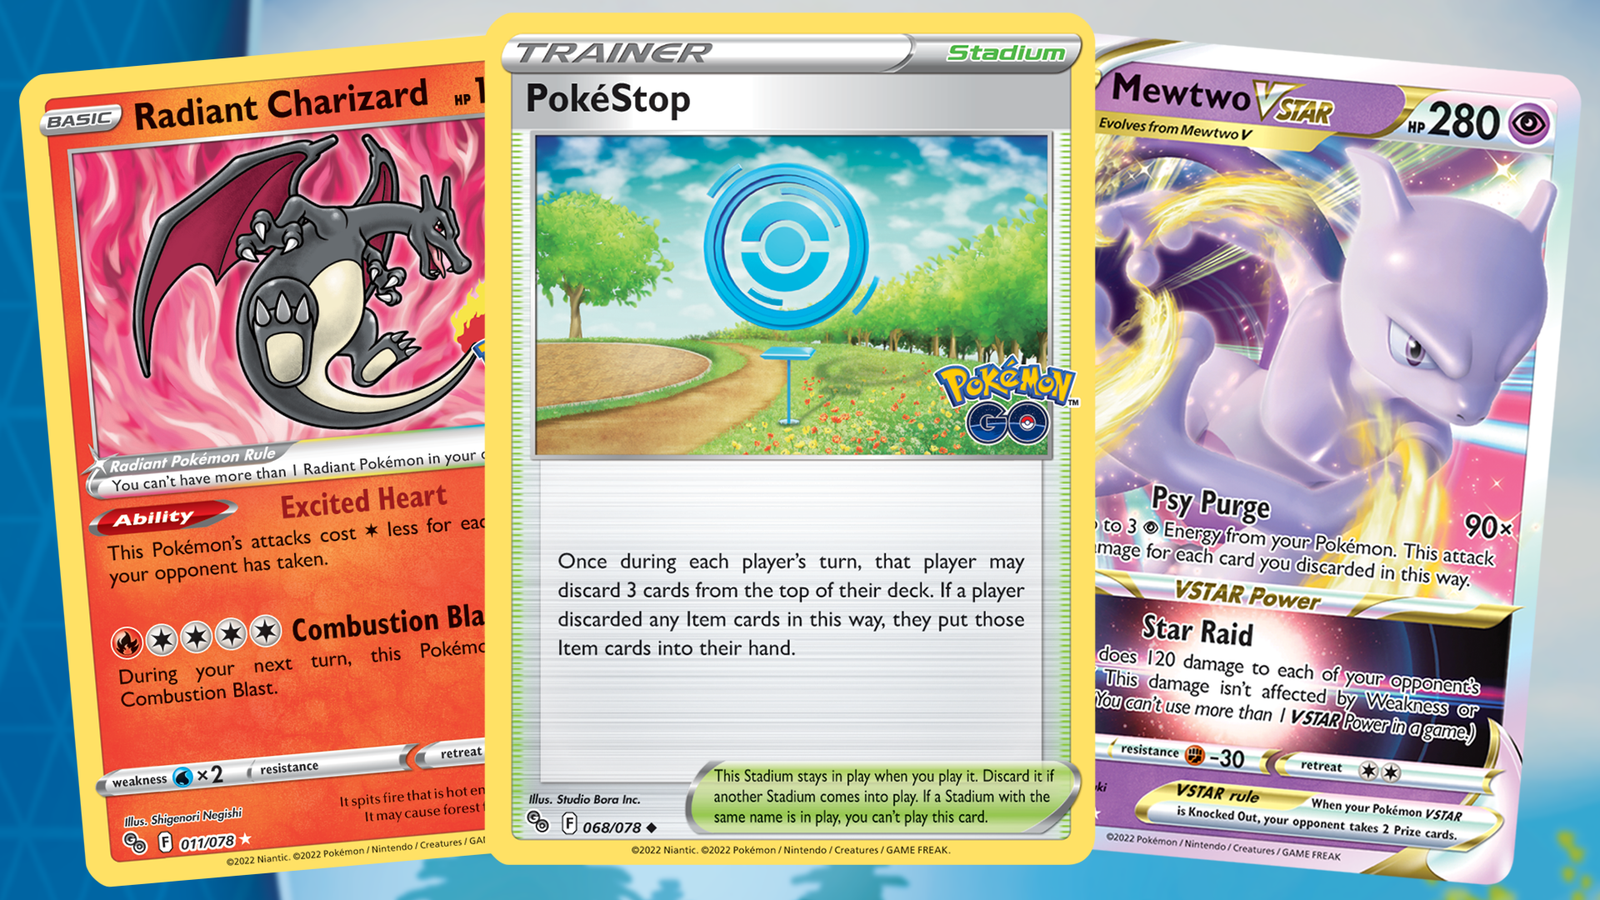 The Best Pokémon Cards of All Time